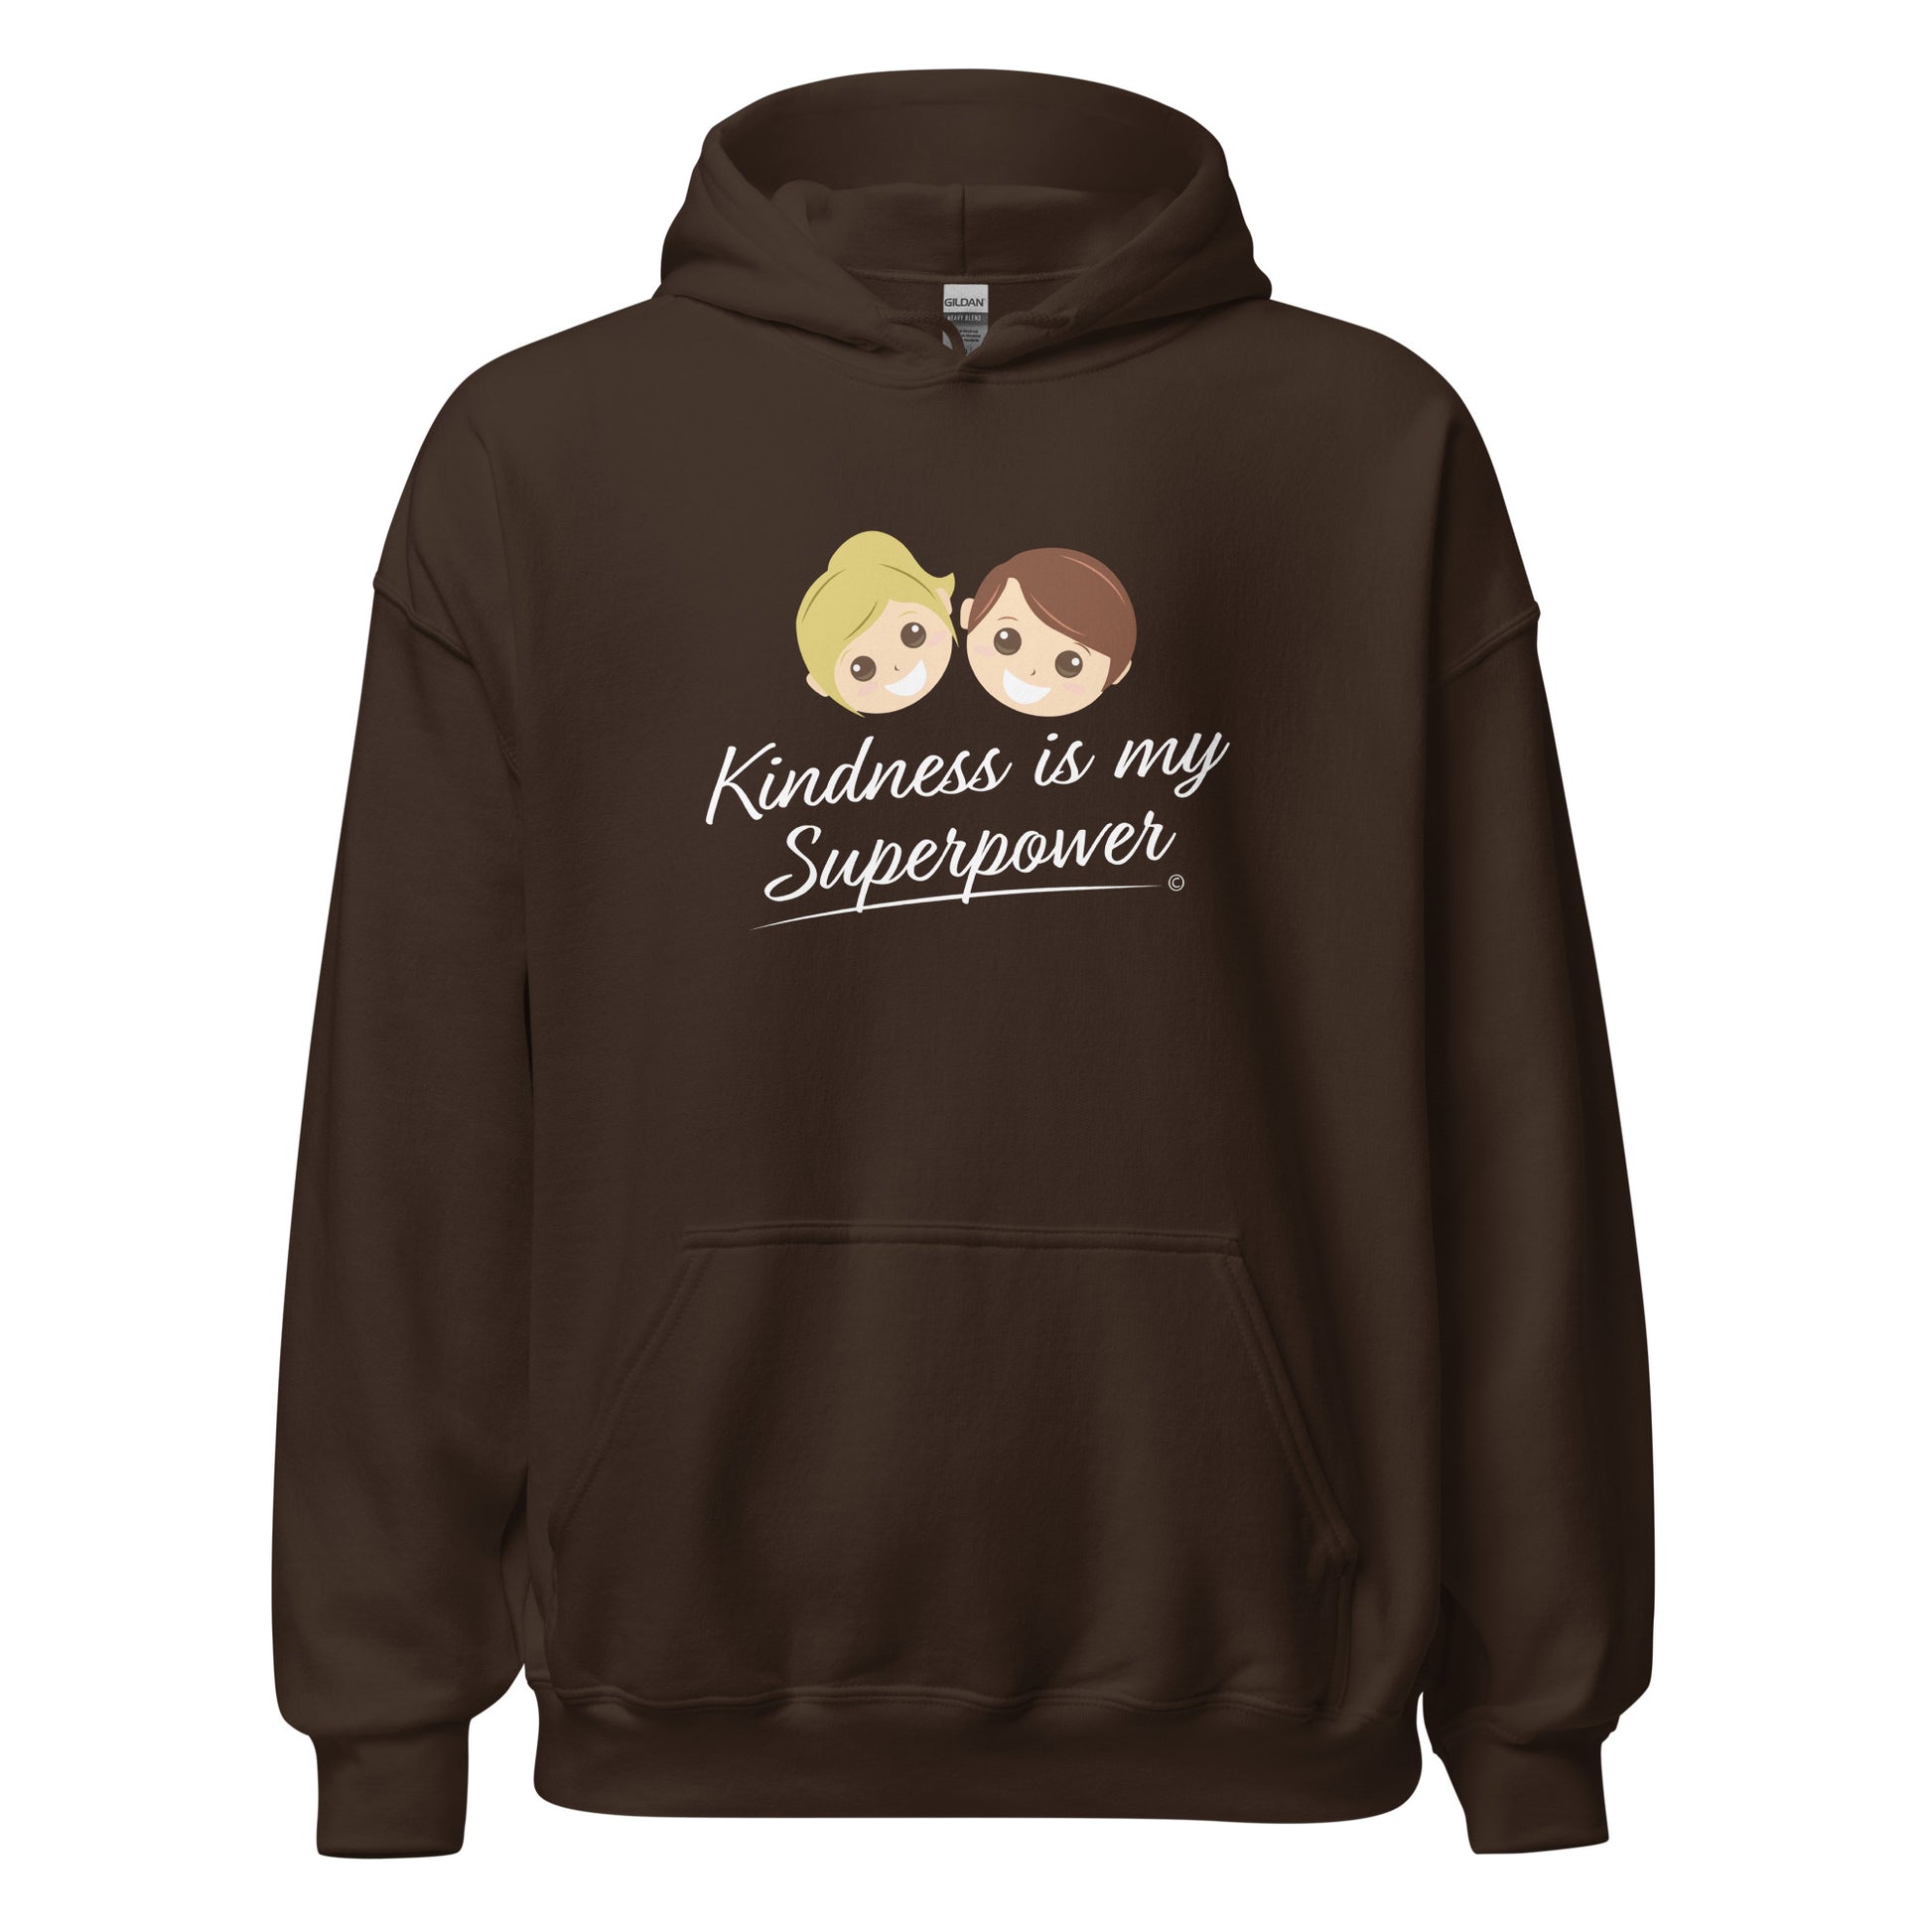 A cozy unisex hoodie in dark chocolate brown featuring the uplifting quote 'Kindness is my Superpower' in bold lettering.